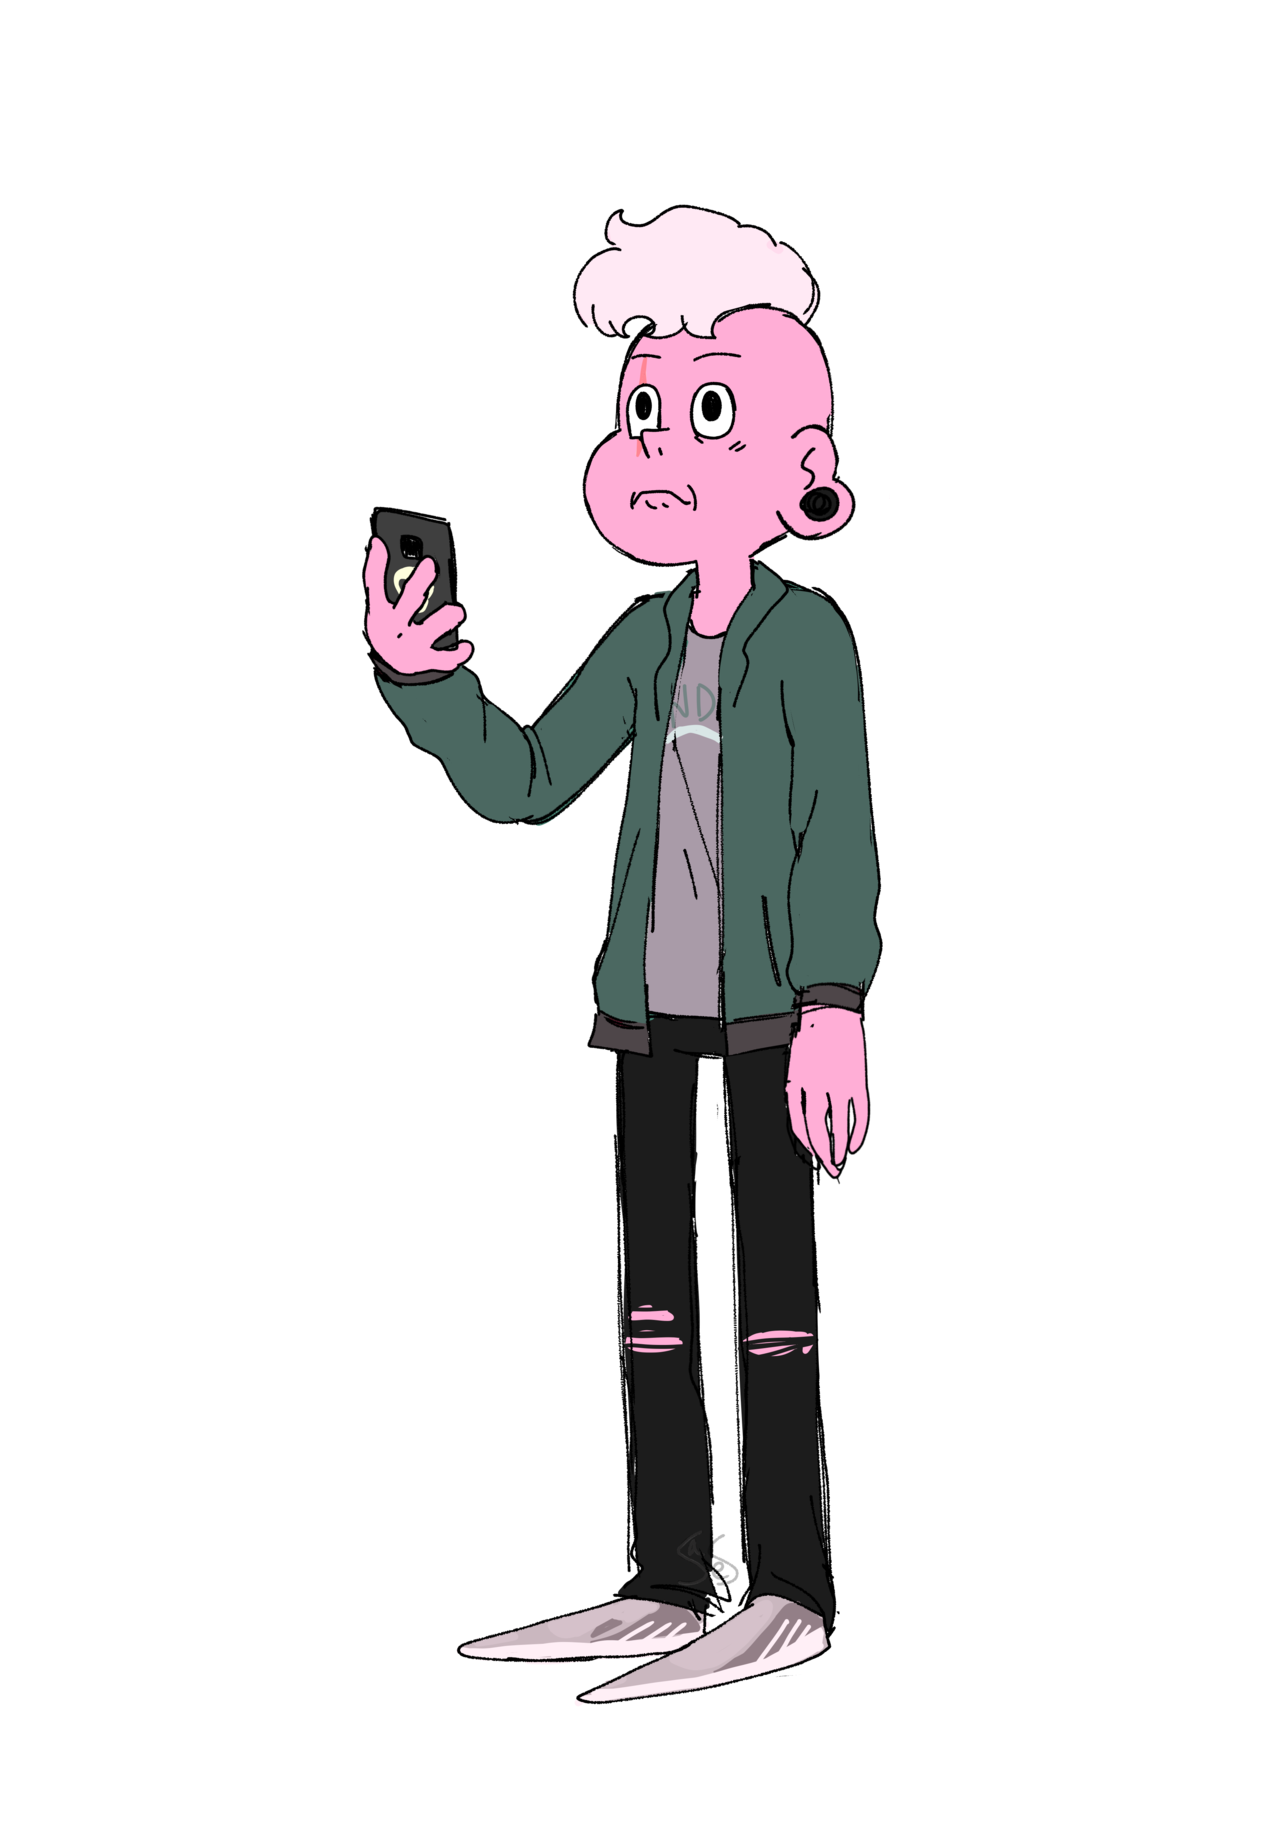 Whyd you do that, Lars?